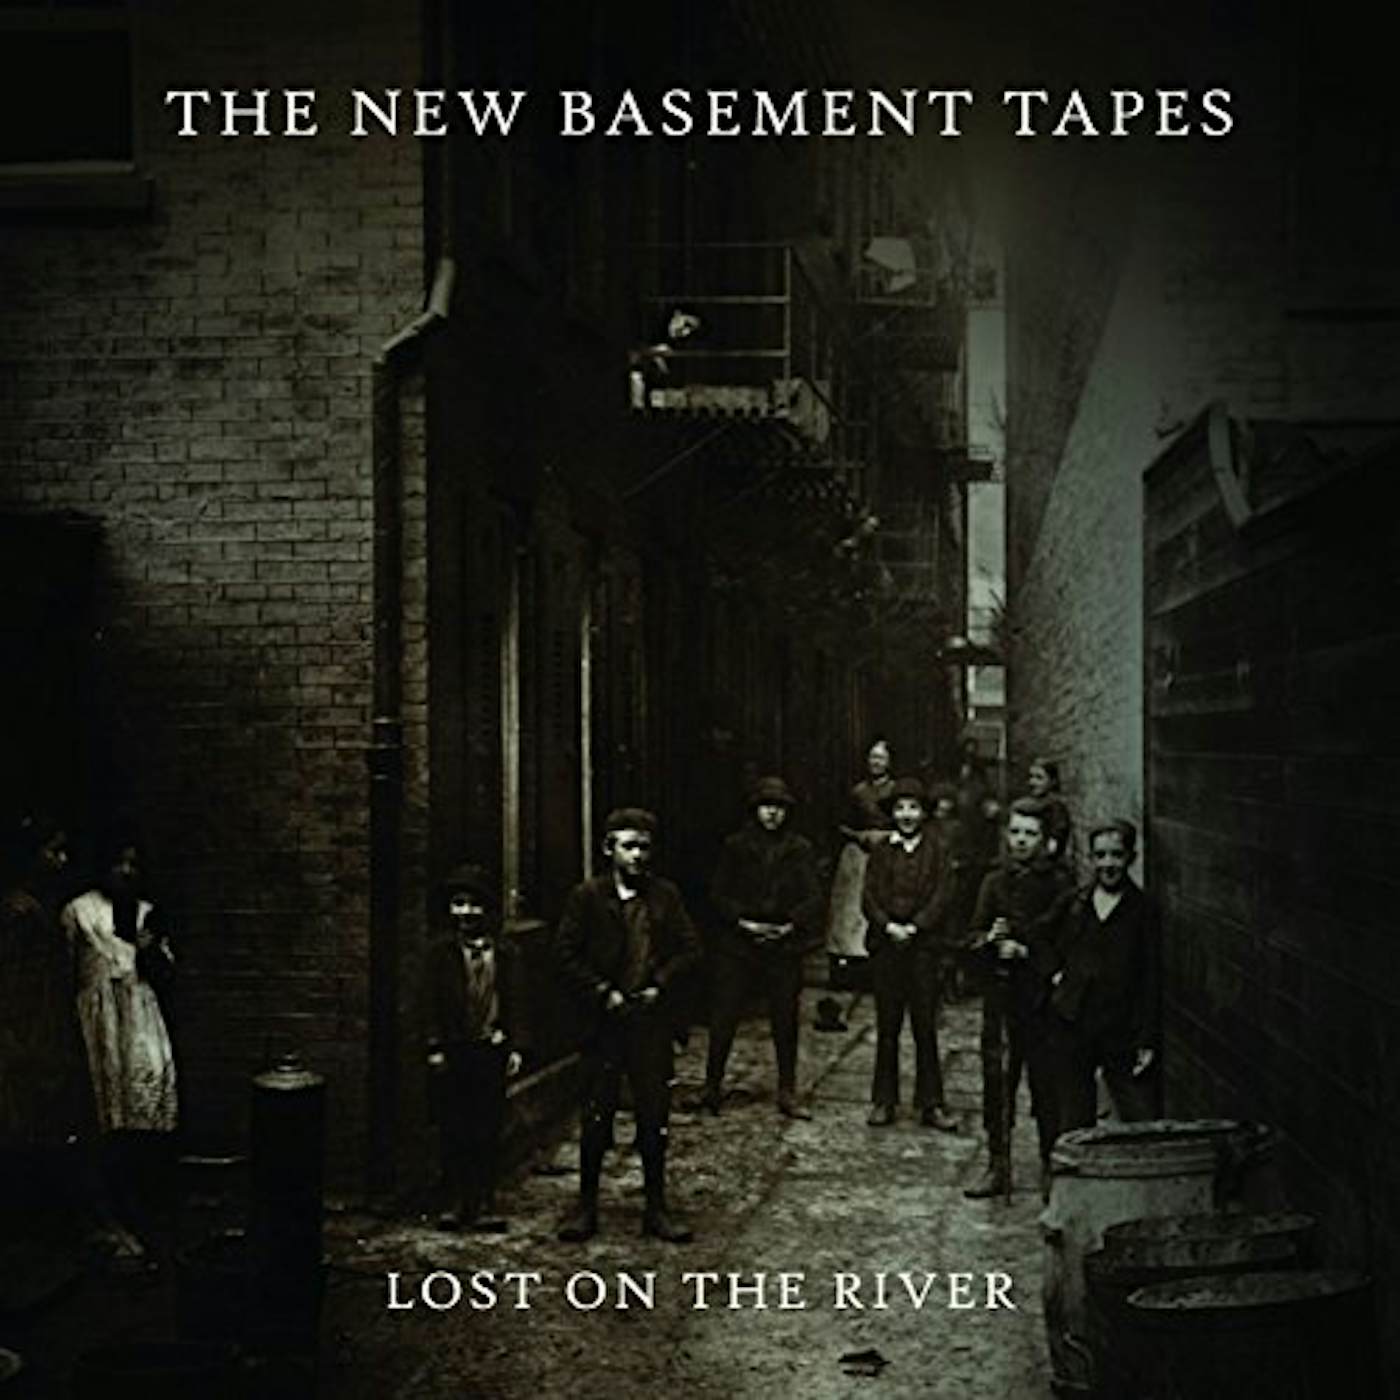 The New Basement Tapes LOST ON THE RIVER CD